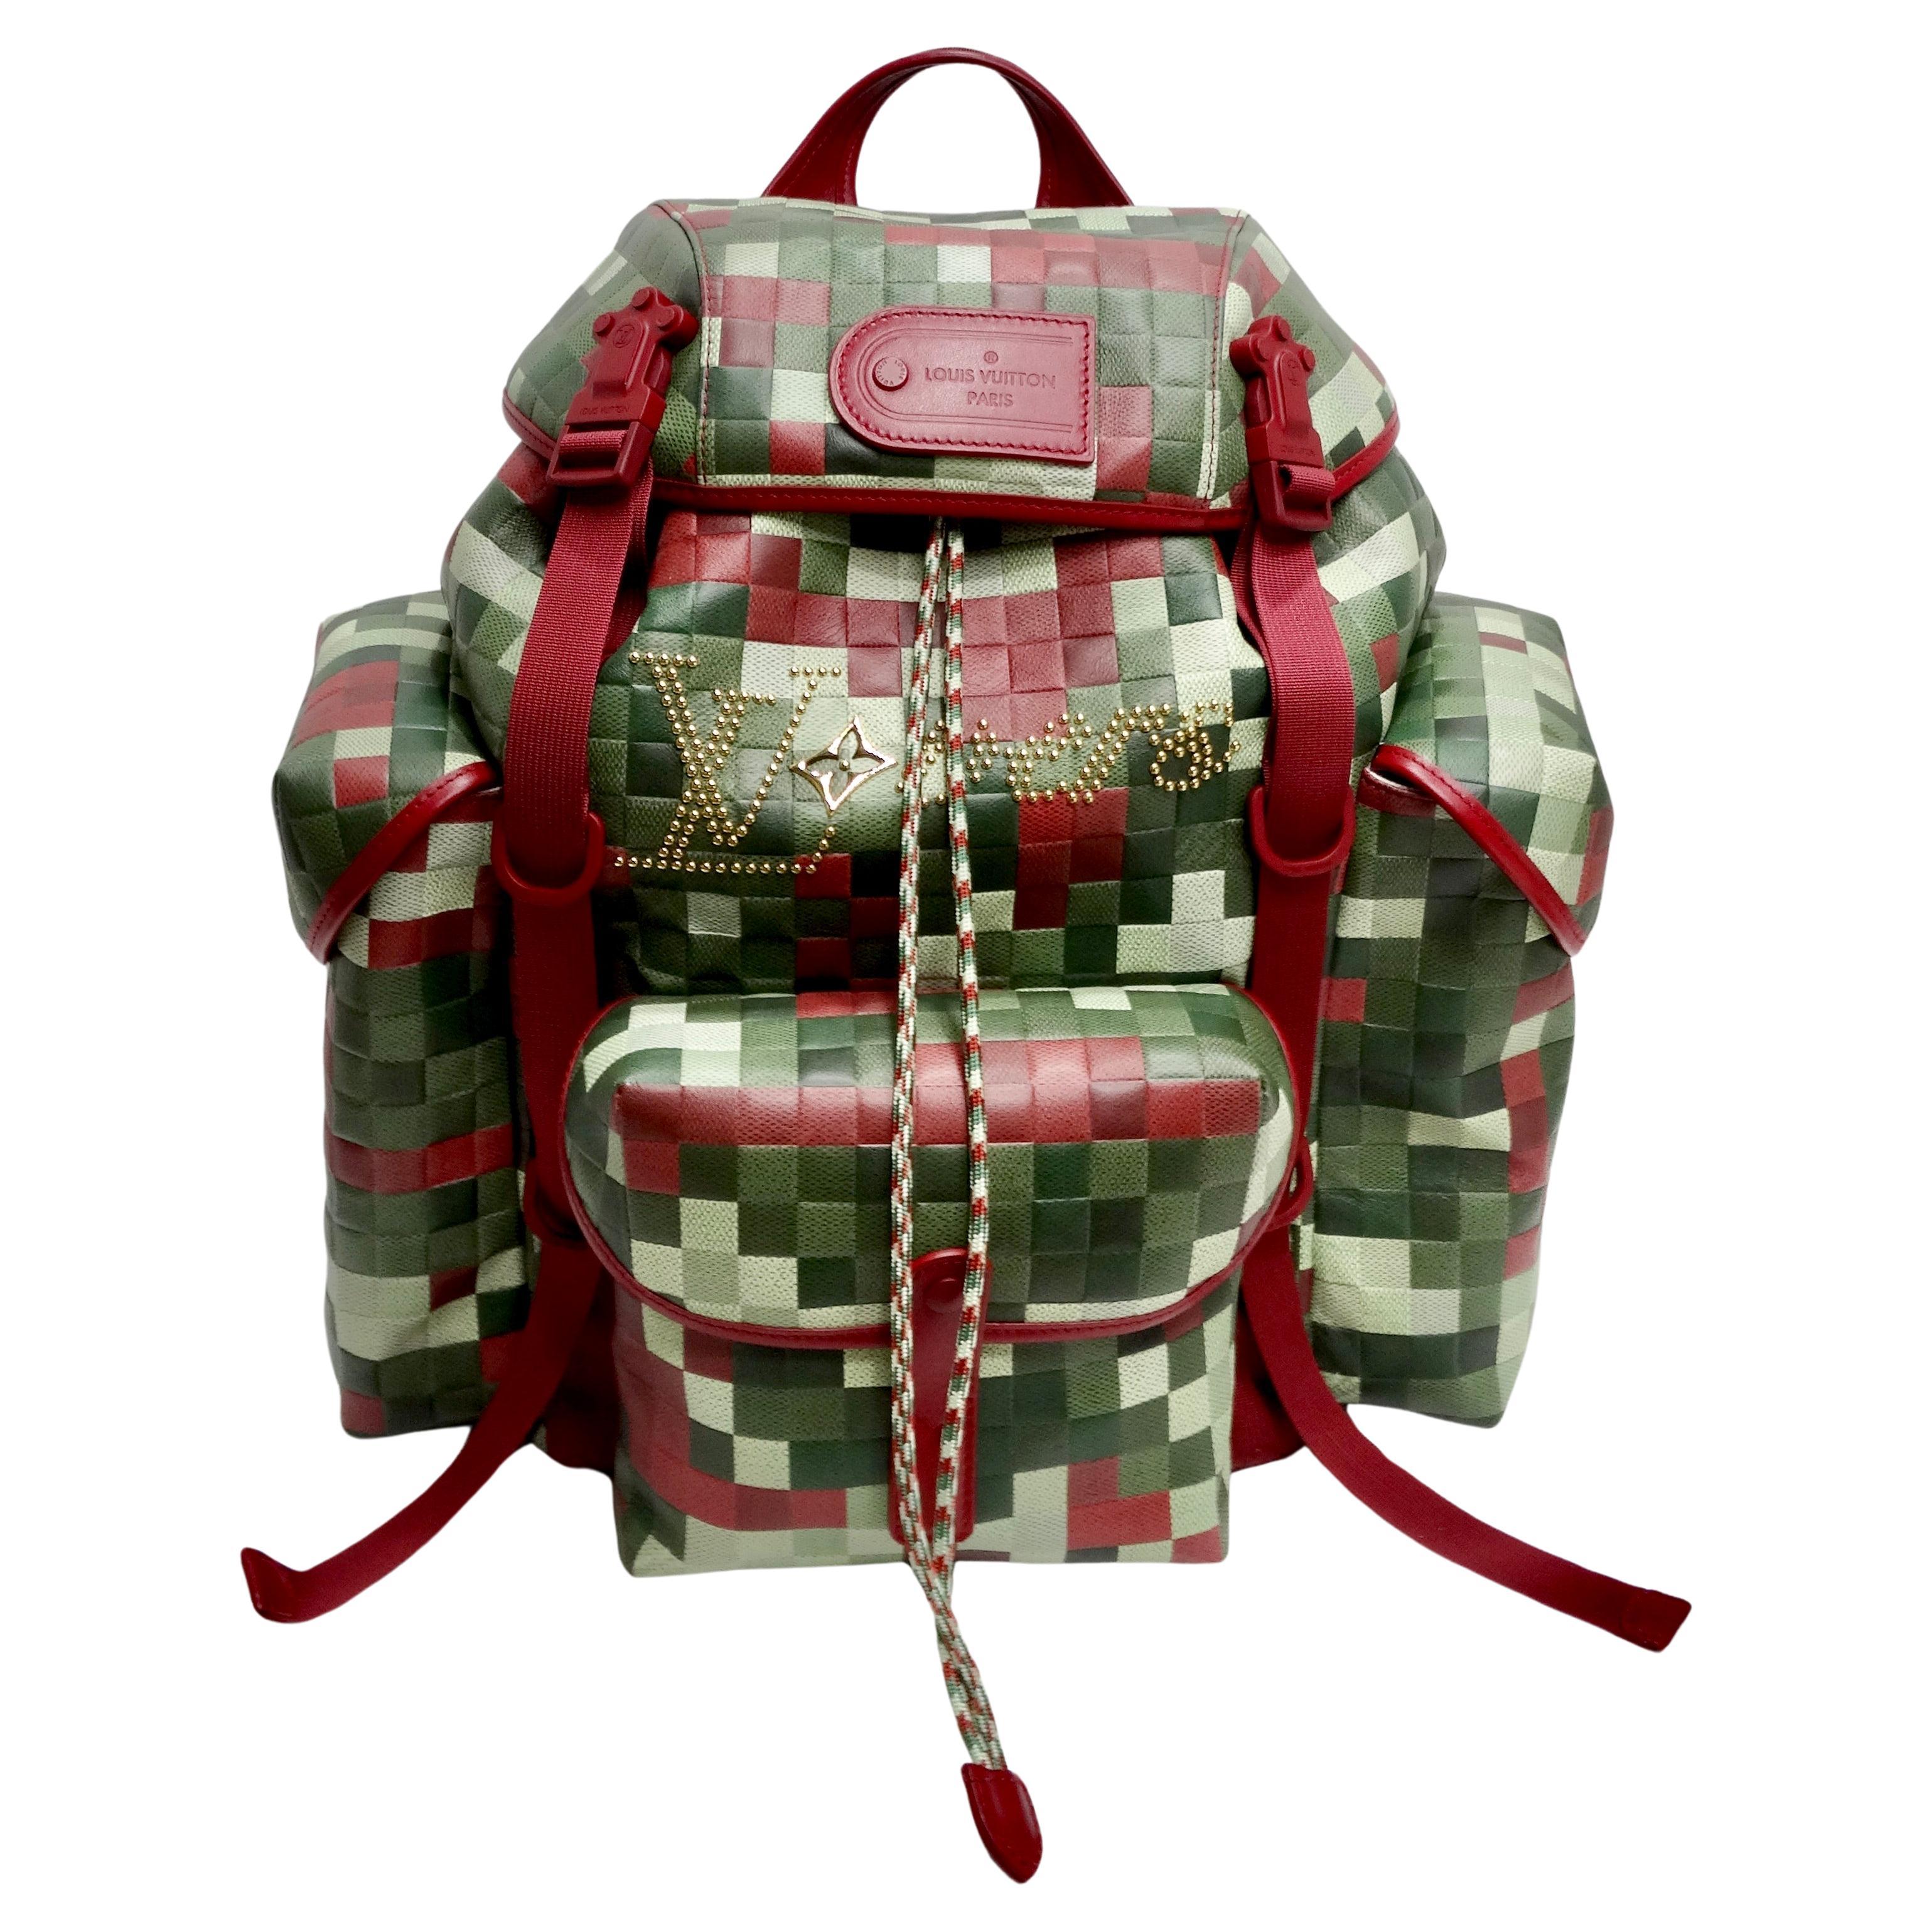 What is the best mens backpack?